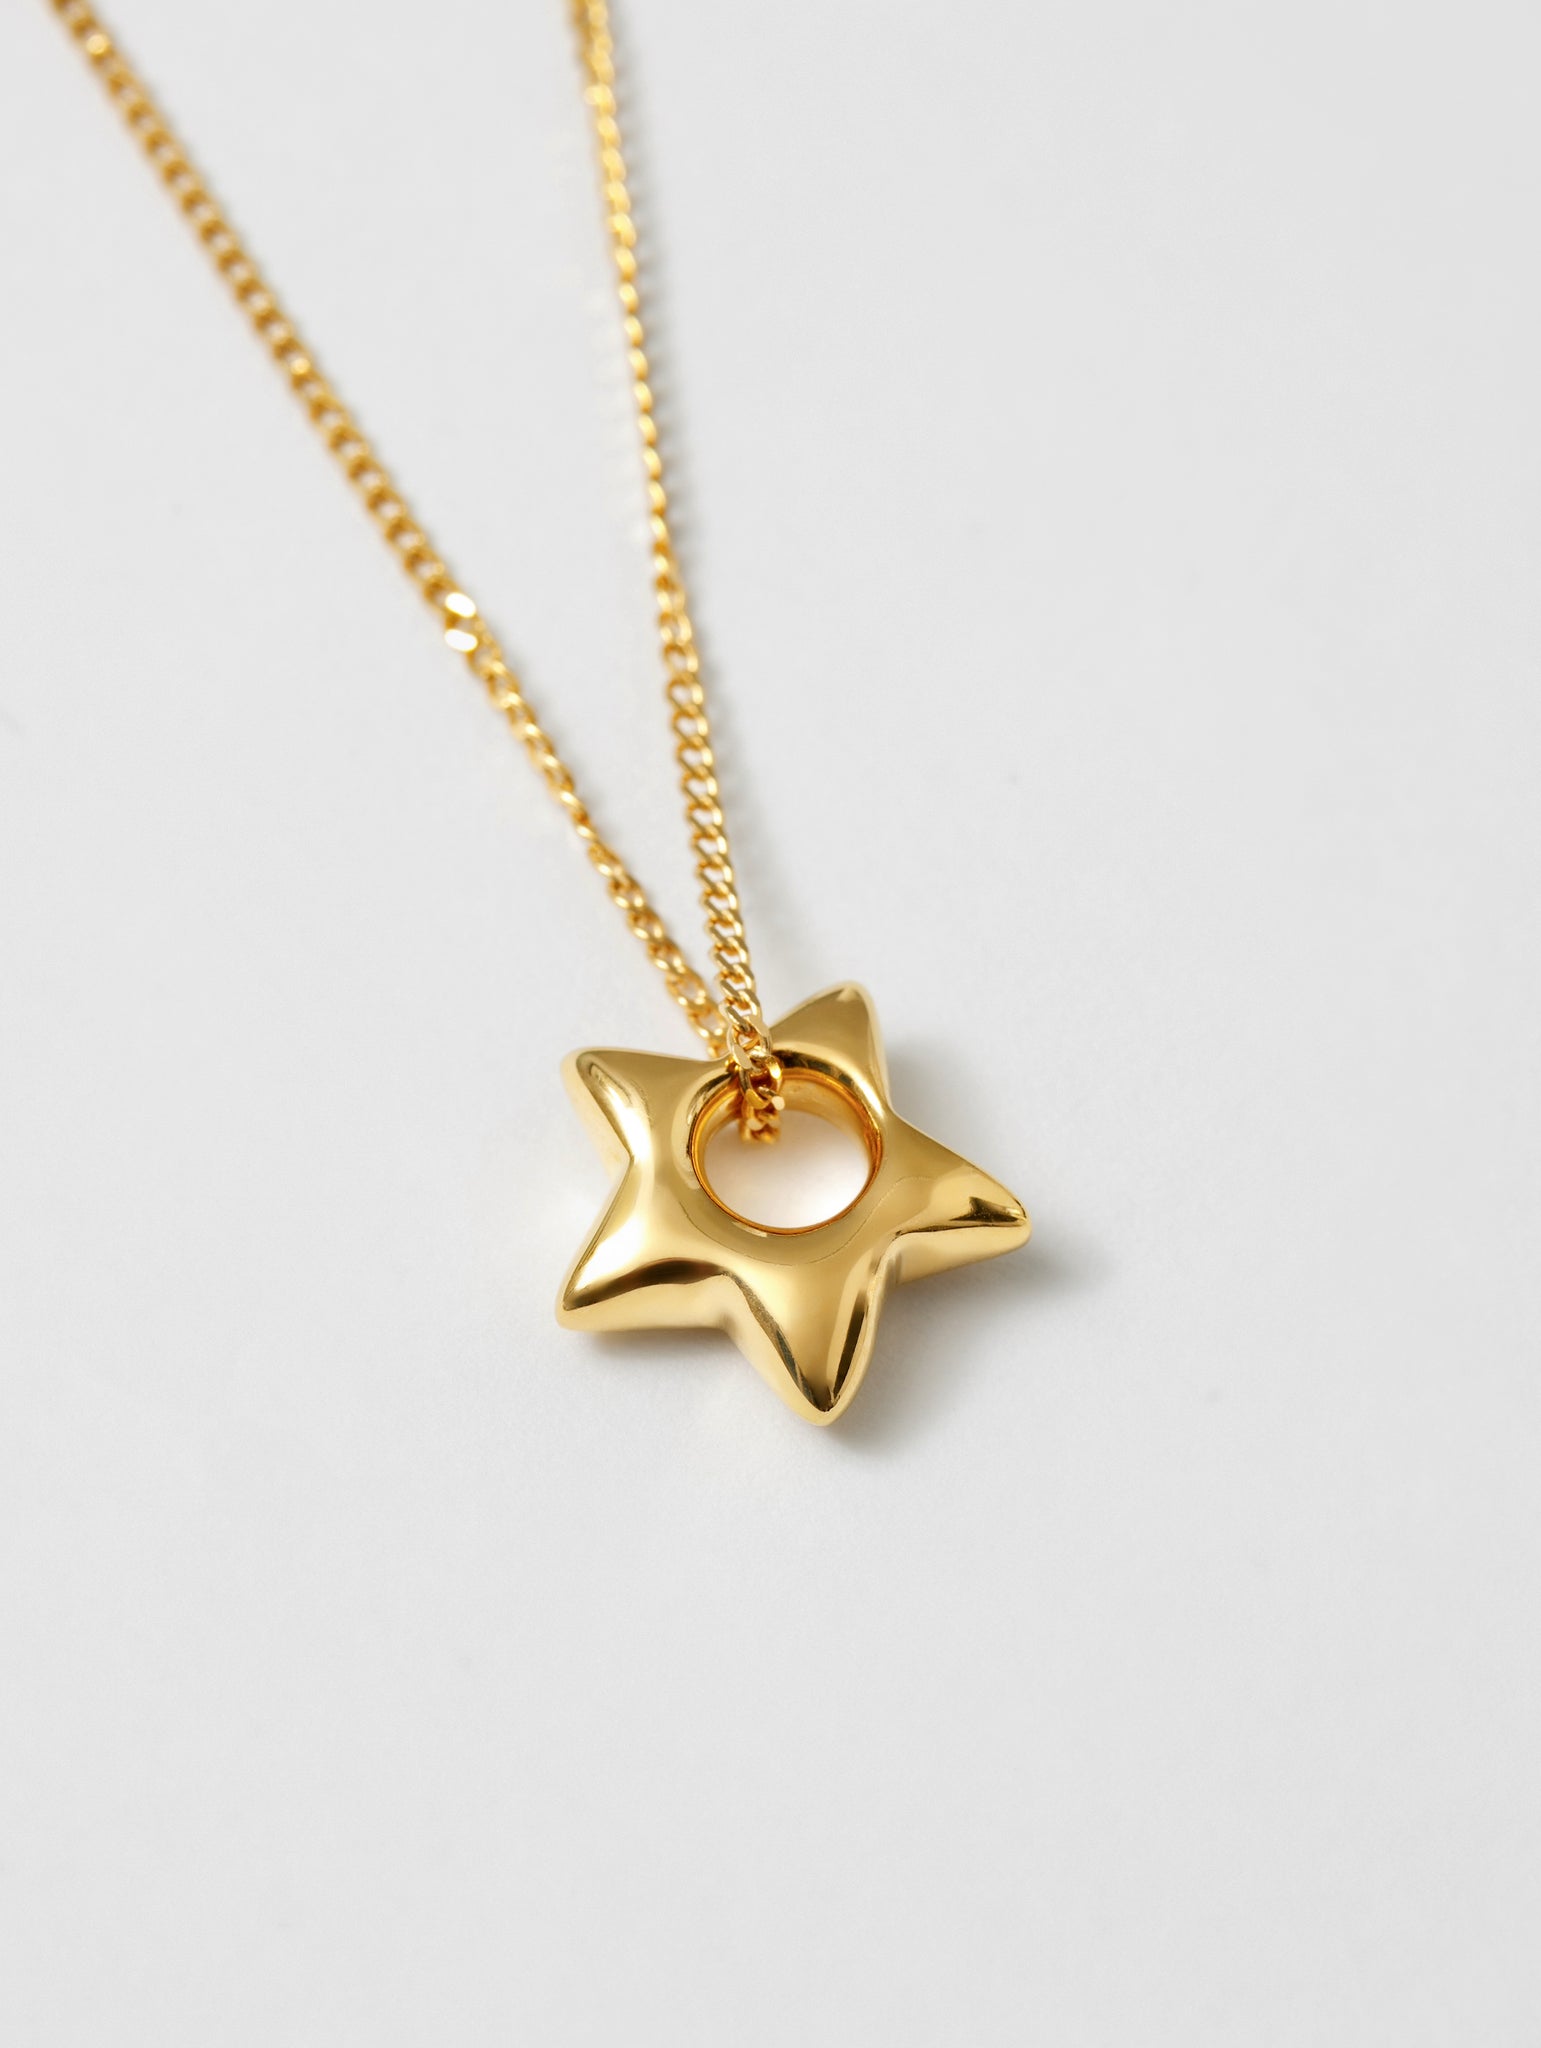 Wolf Circus-Wolf Circus Star Charm Pendant Necklace in 14k Gold | Recycled Metals-